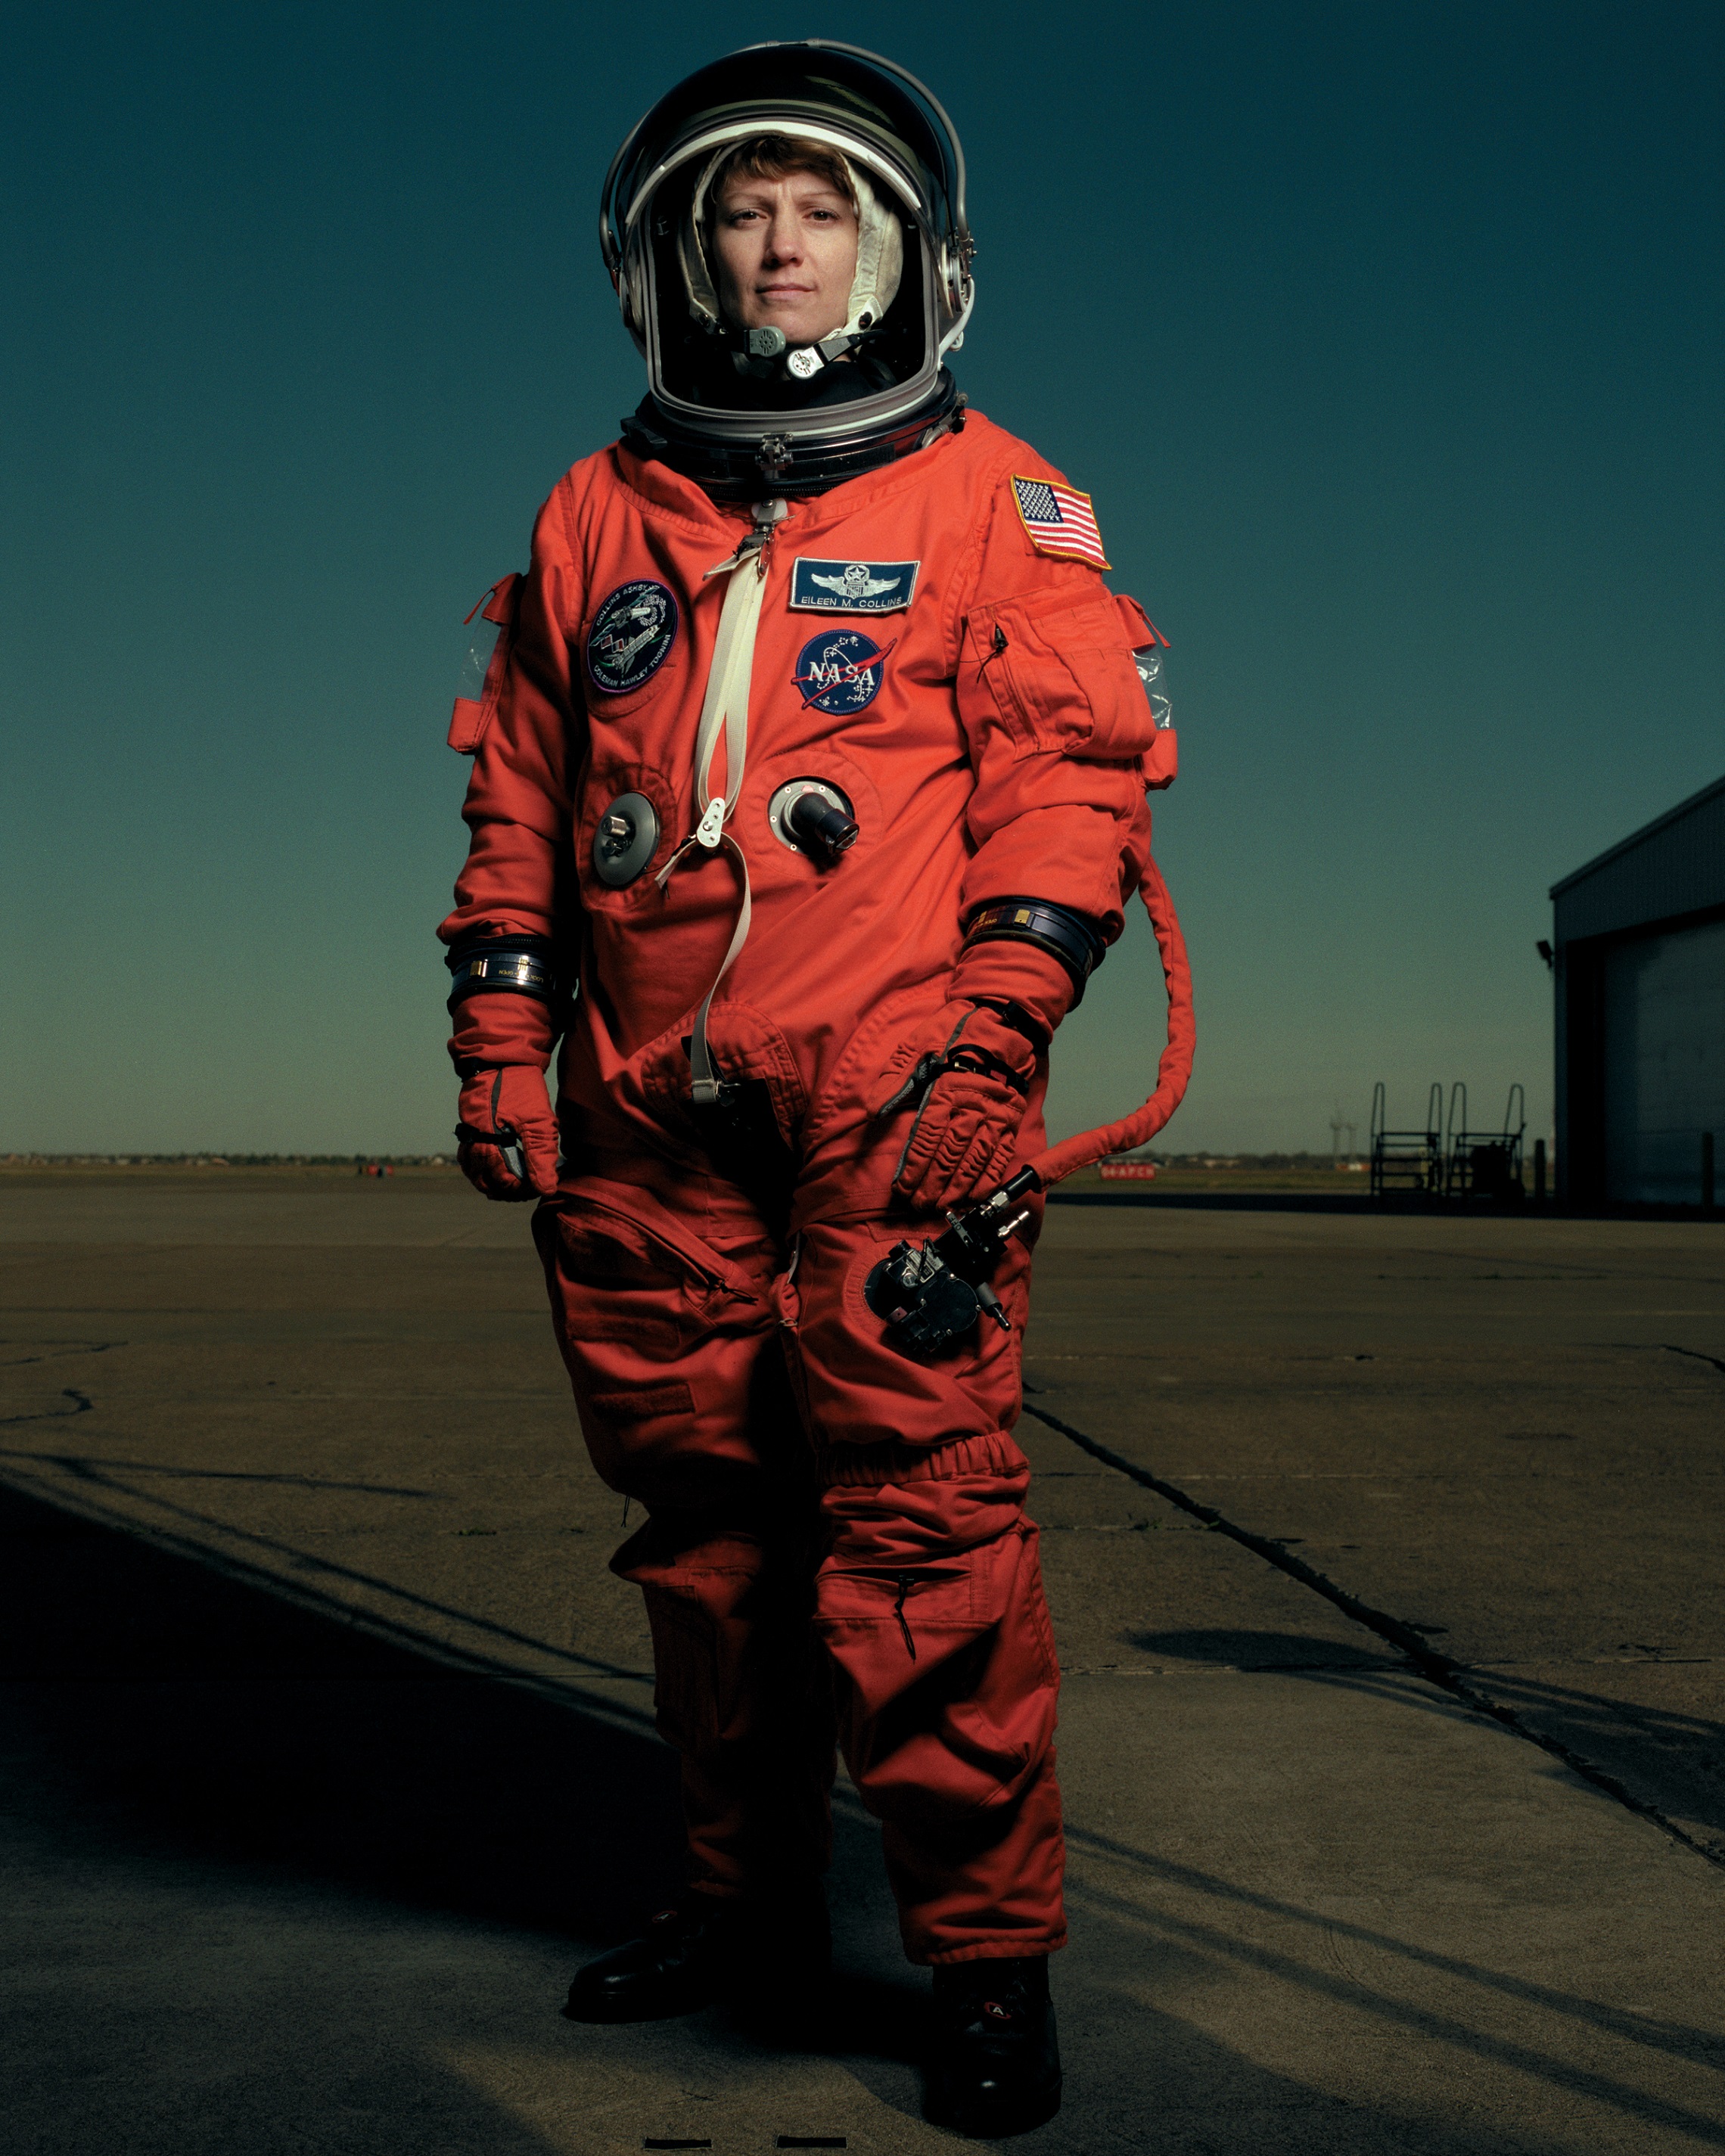 Colonel Eileen Marie Collins, U.S. Air Force, wearing ACES suit. (Annie Leibovitz)